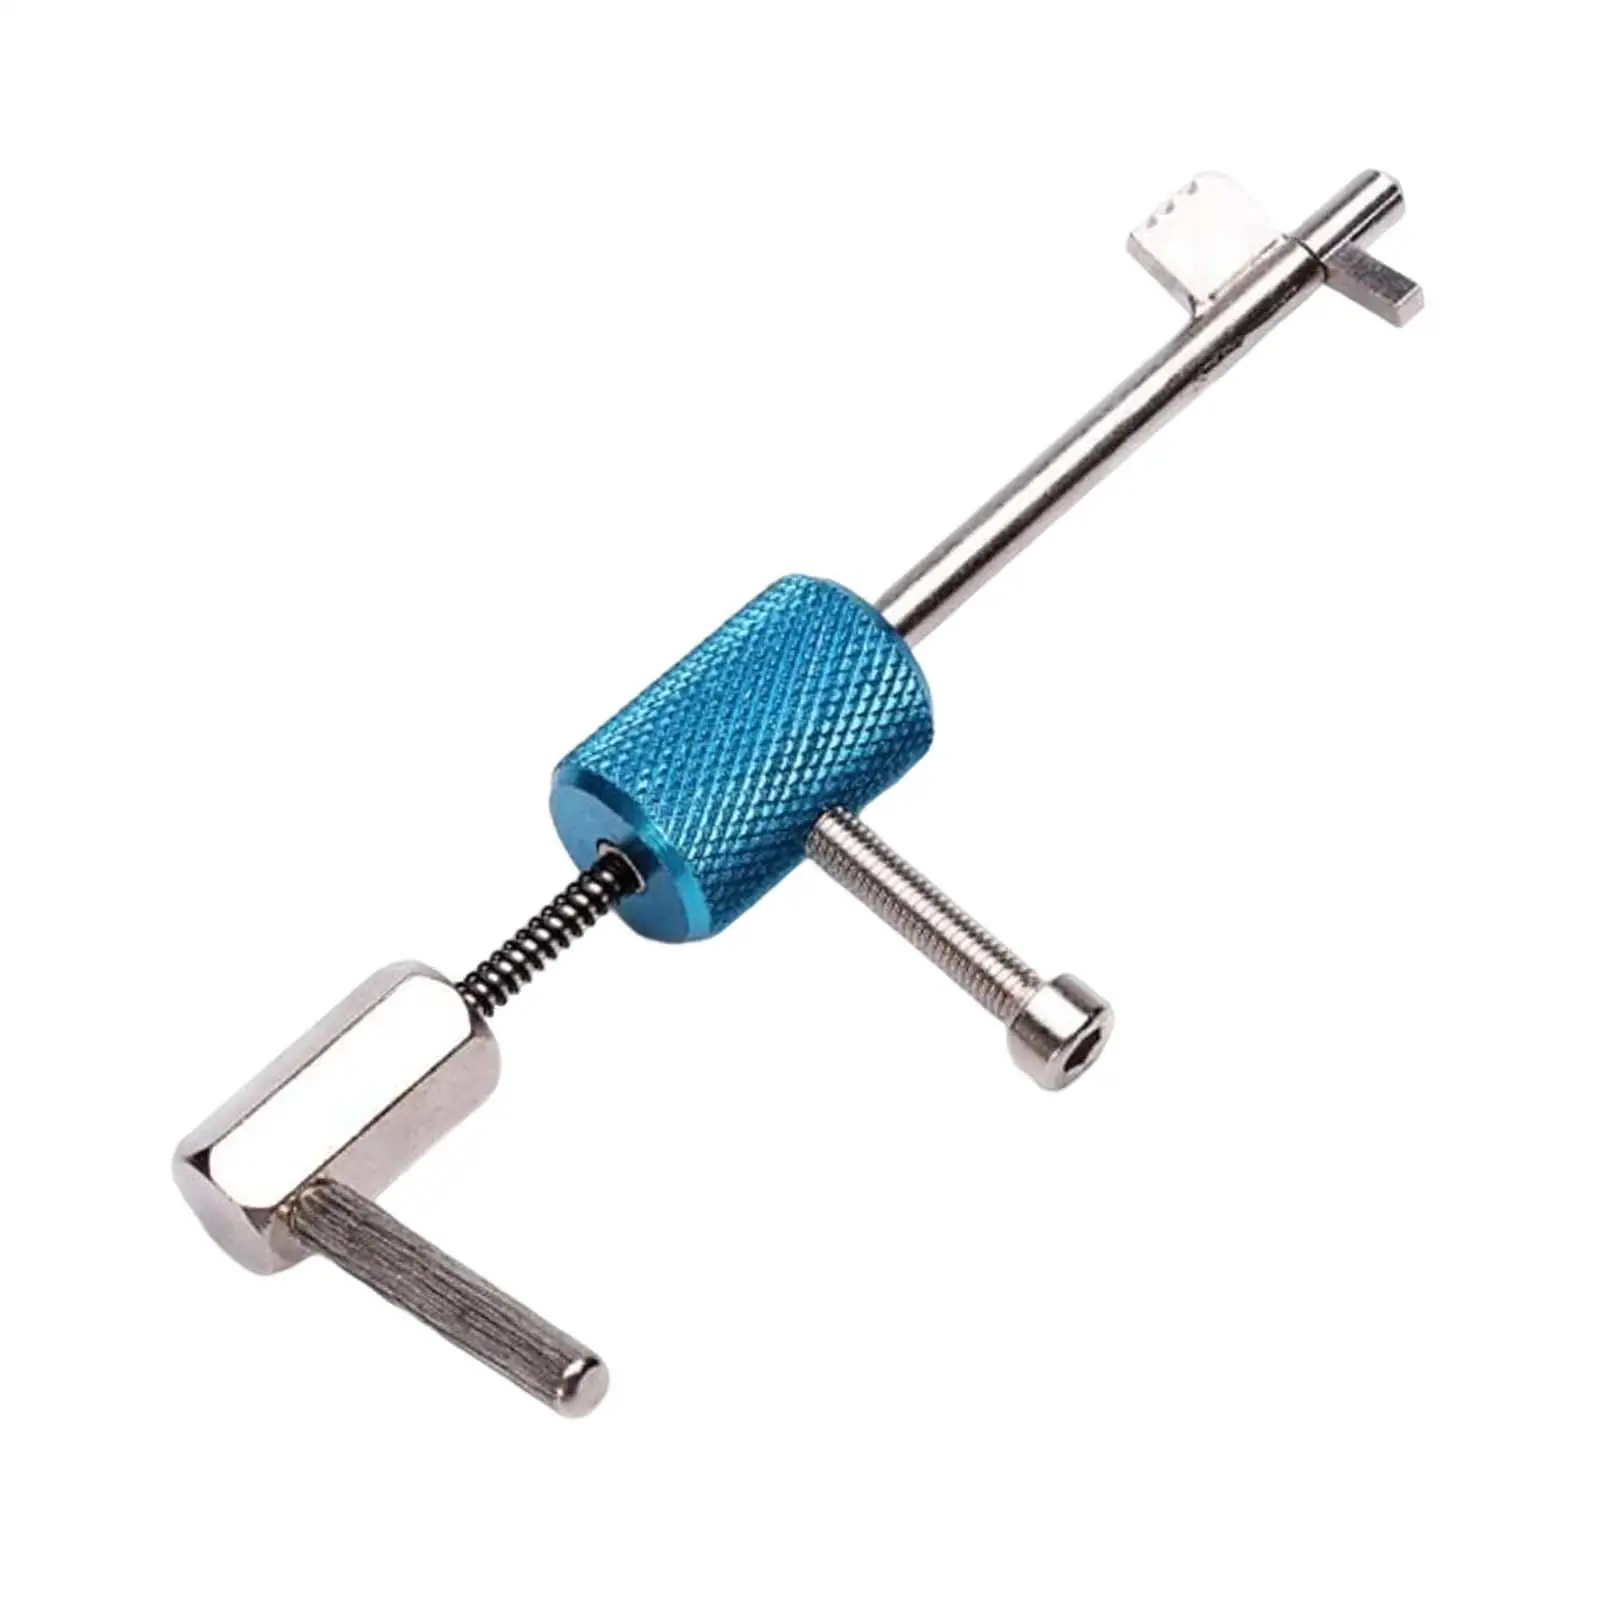 Stainless Steel Lock Openning Tool Household Hand Tool Wrench Civil Lock Opener Open Civil Lock Picking Tools